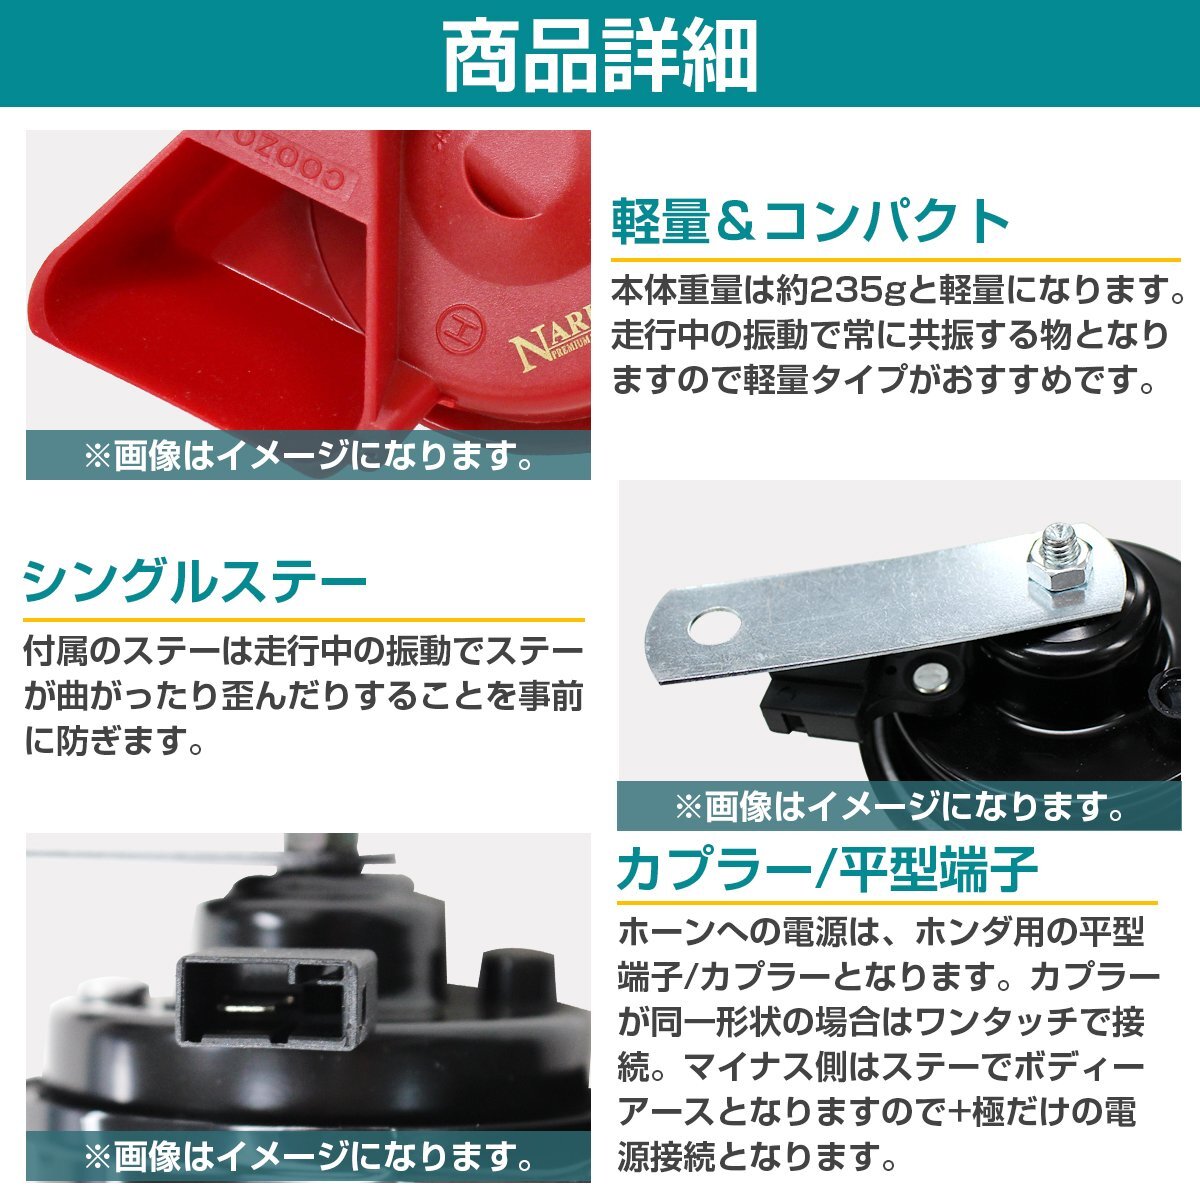 [ new goods immediate payment ] Daihatsu exclusive use coupler design Lexus sound horn height sound low sound 110db 2 piece set 12V Tanto Mira tough to Move red 